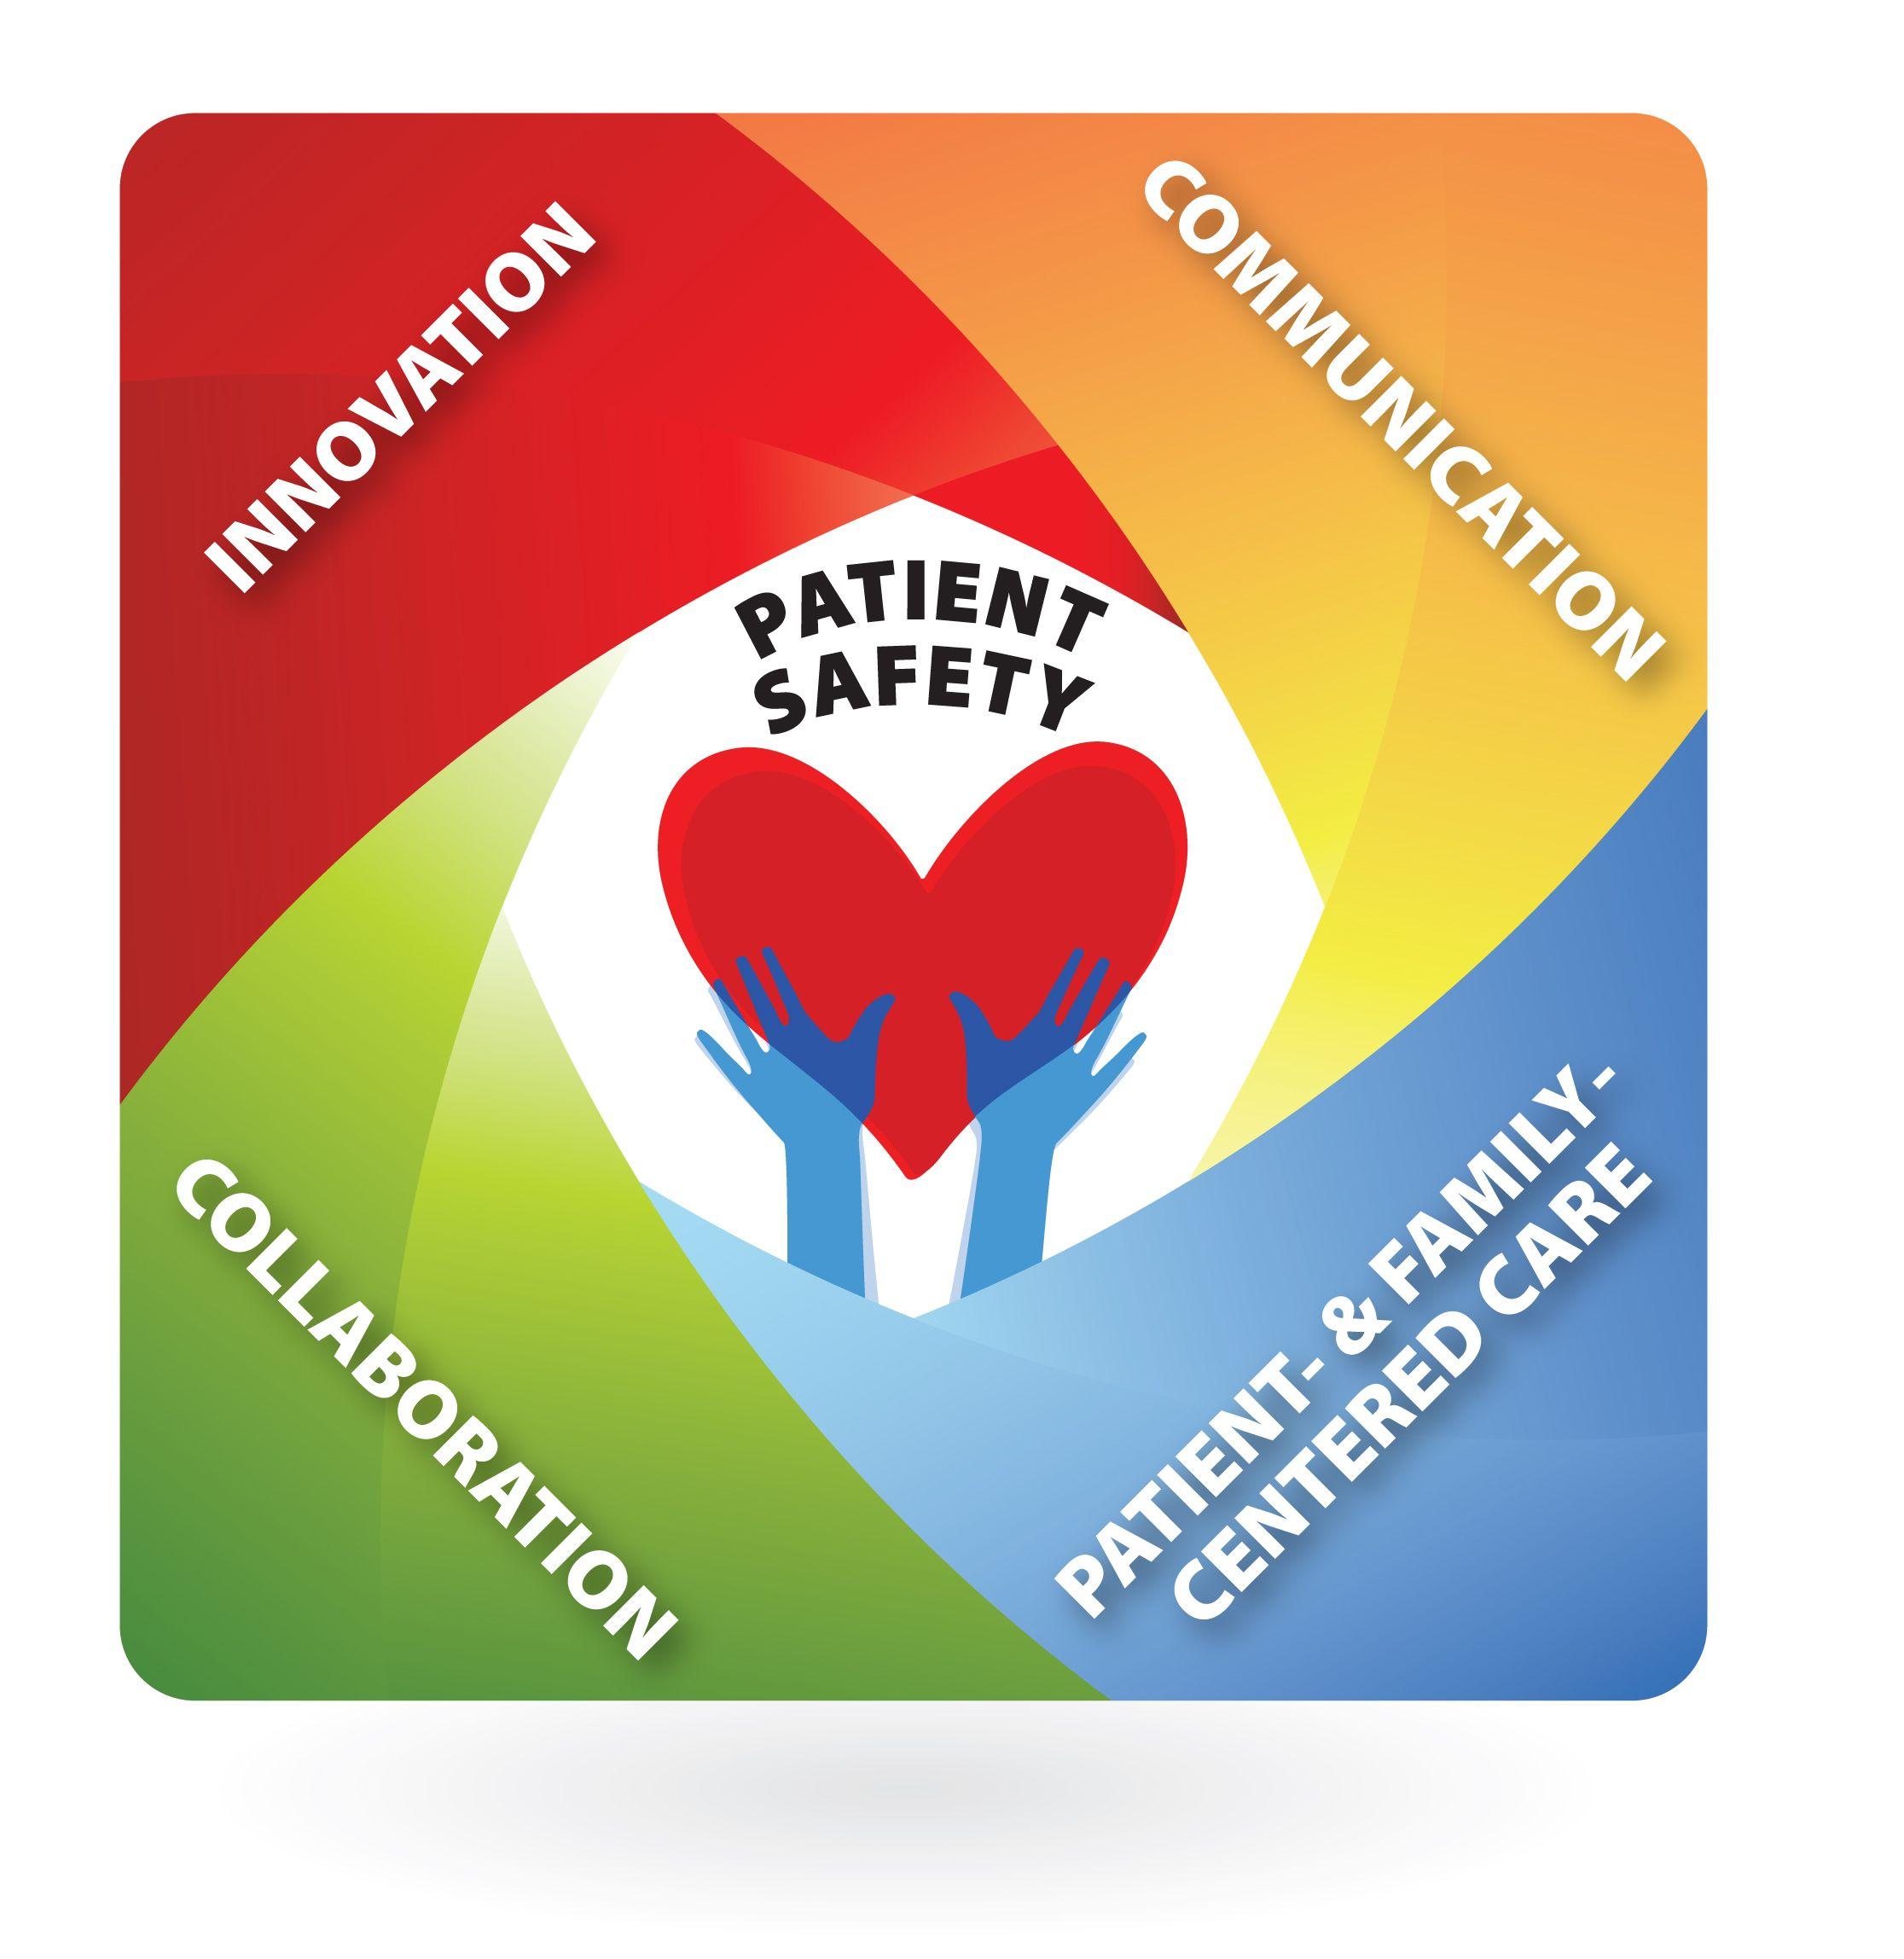 Patient Safety Logo - The Critical Quality Measure: Patient Safety